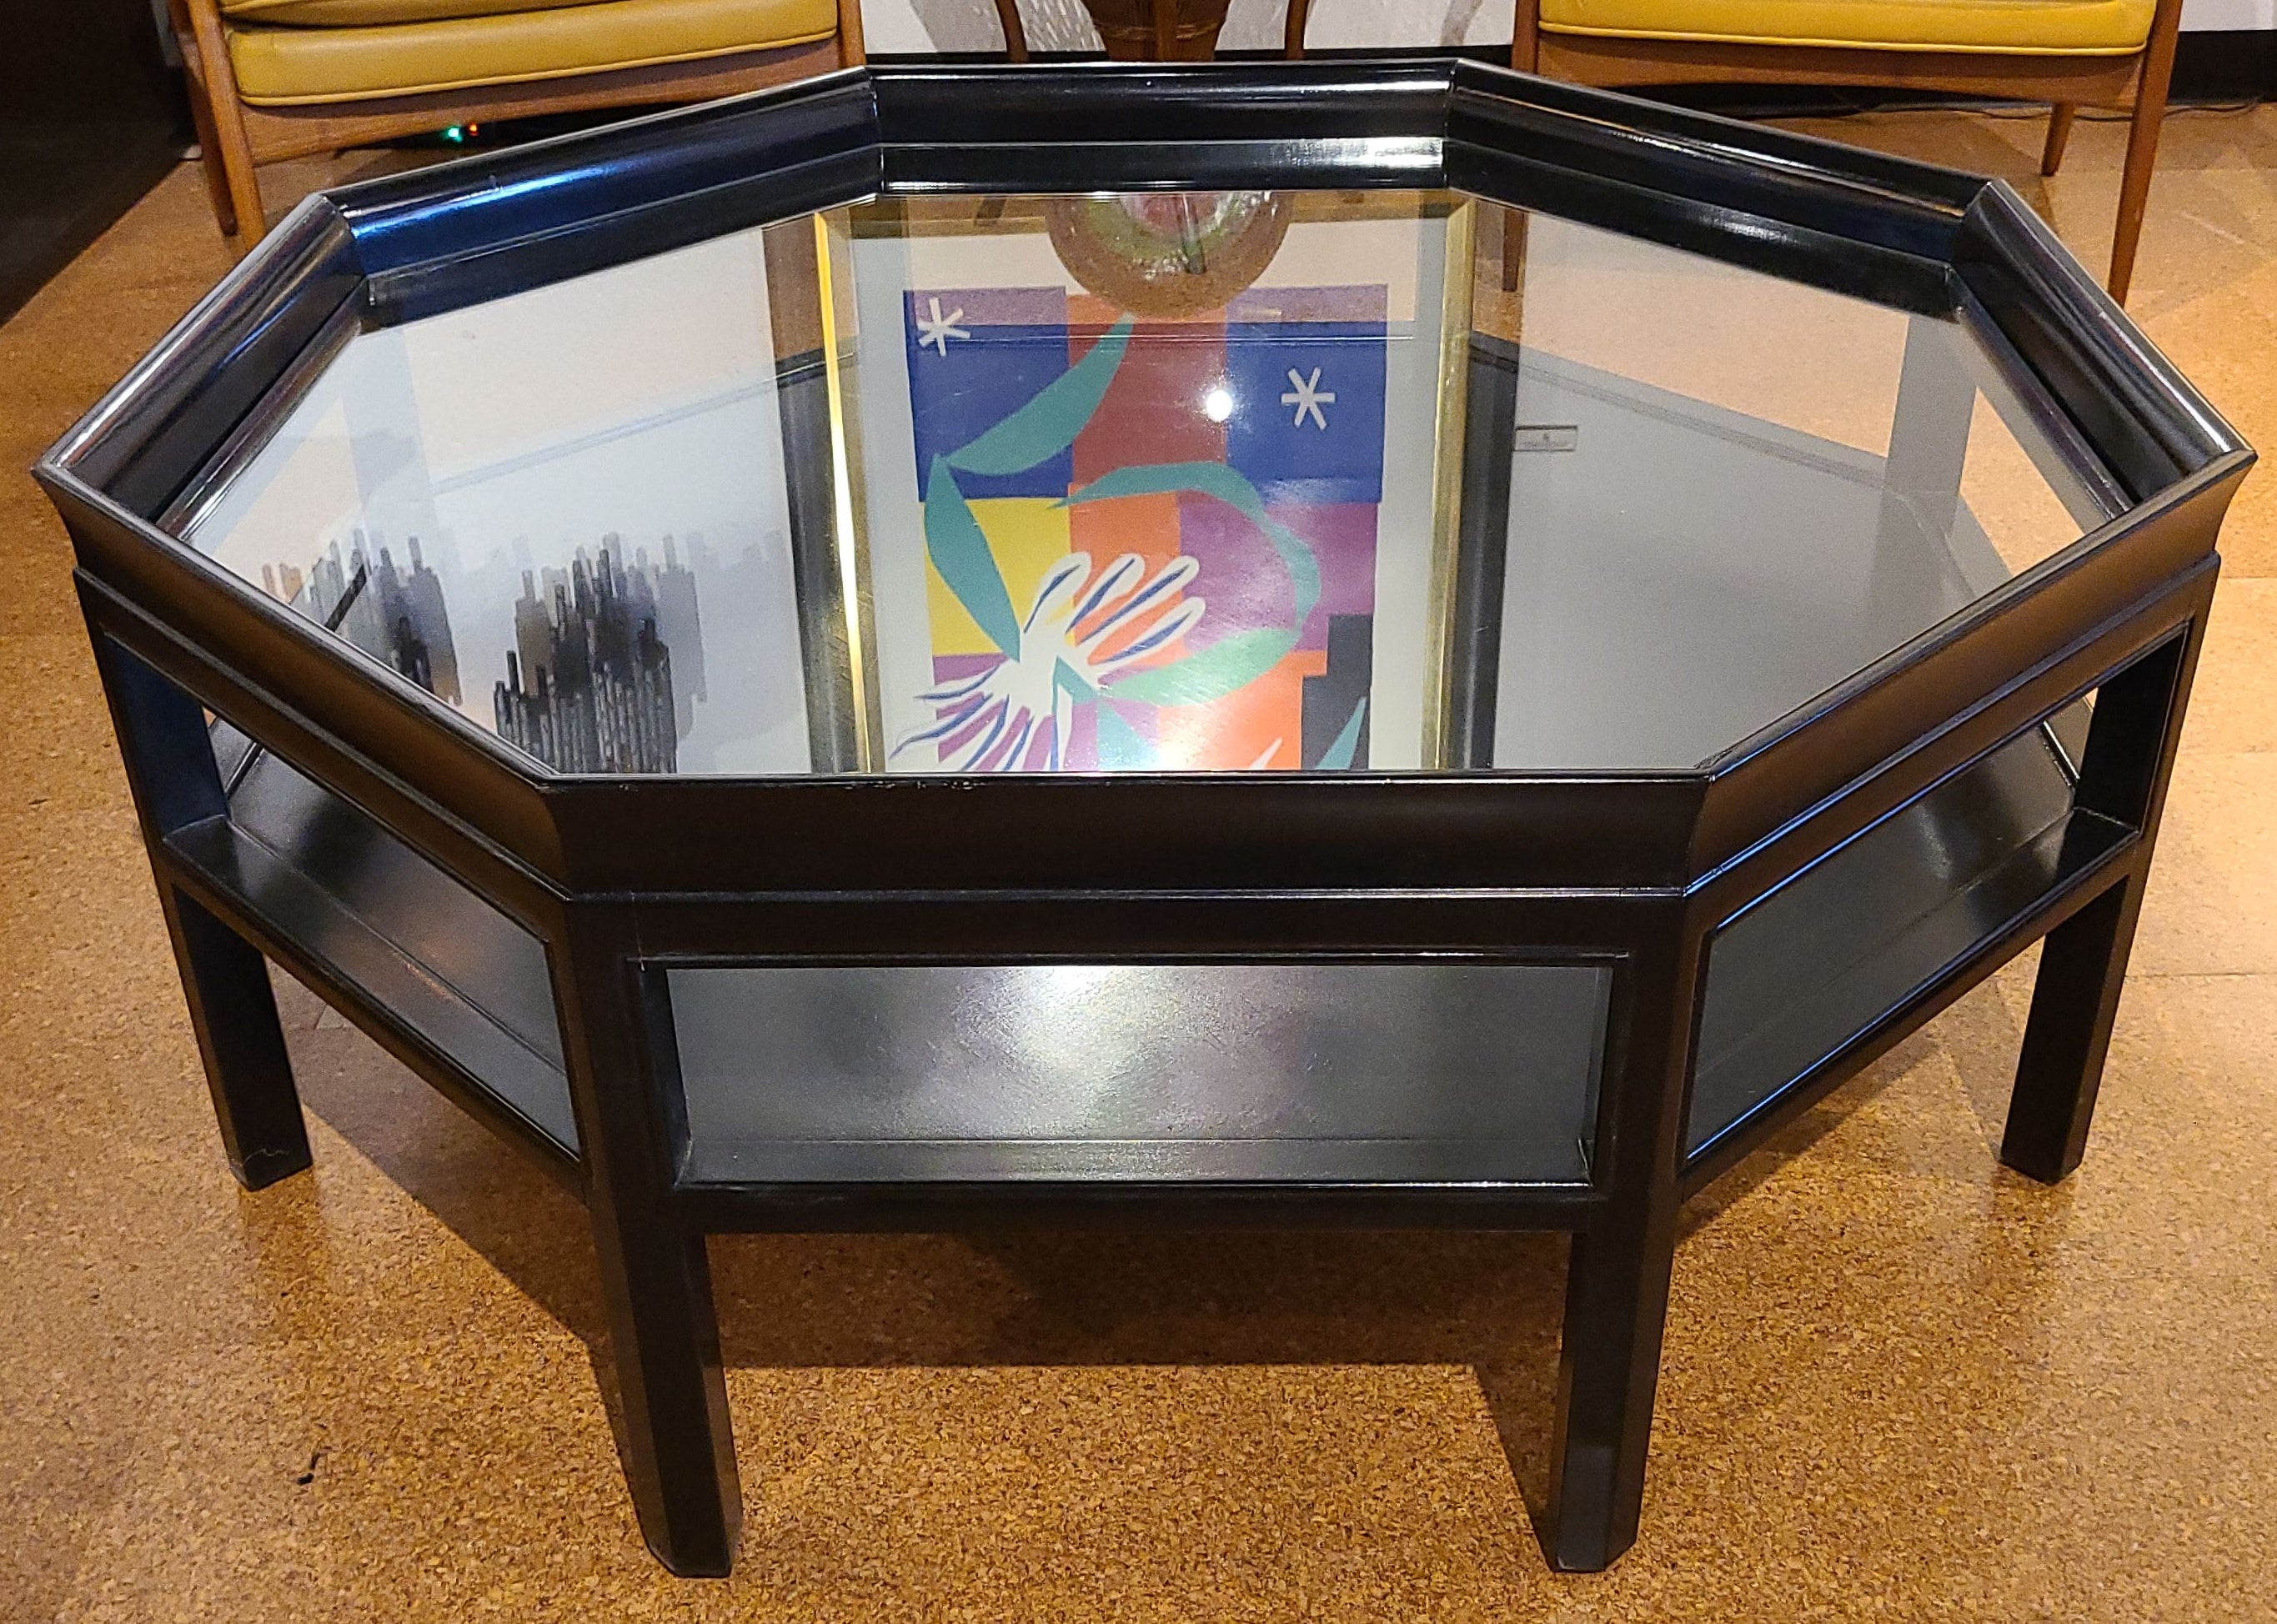 1960s OCTAGONAL GLASS-TOP COCKTAIL TABLE #3442 FROM BAKER FURNITURE